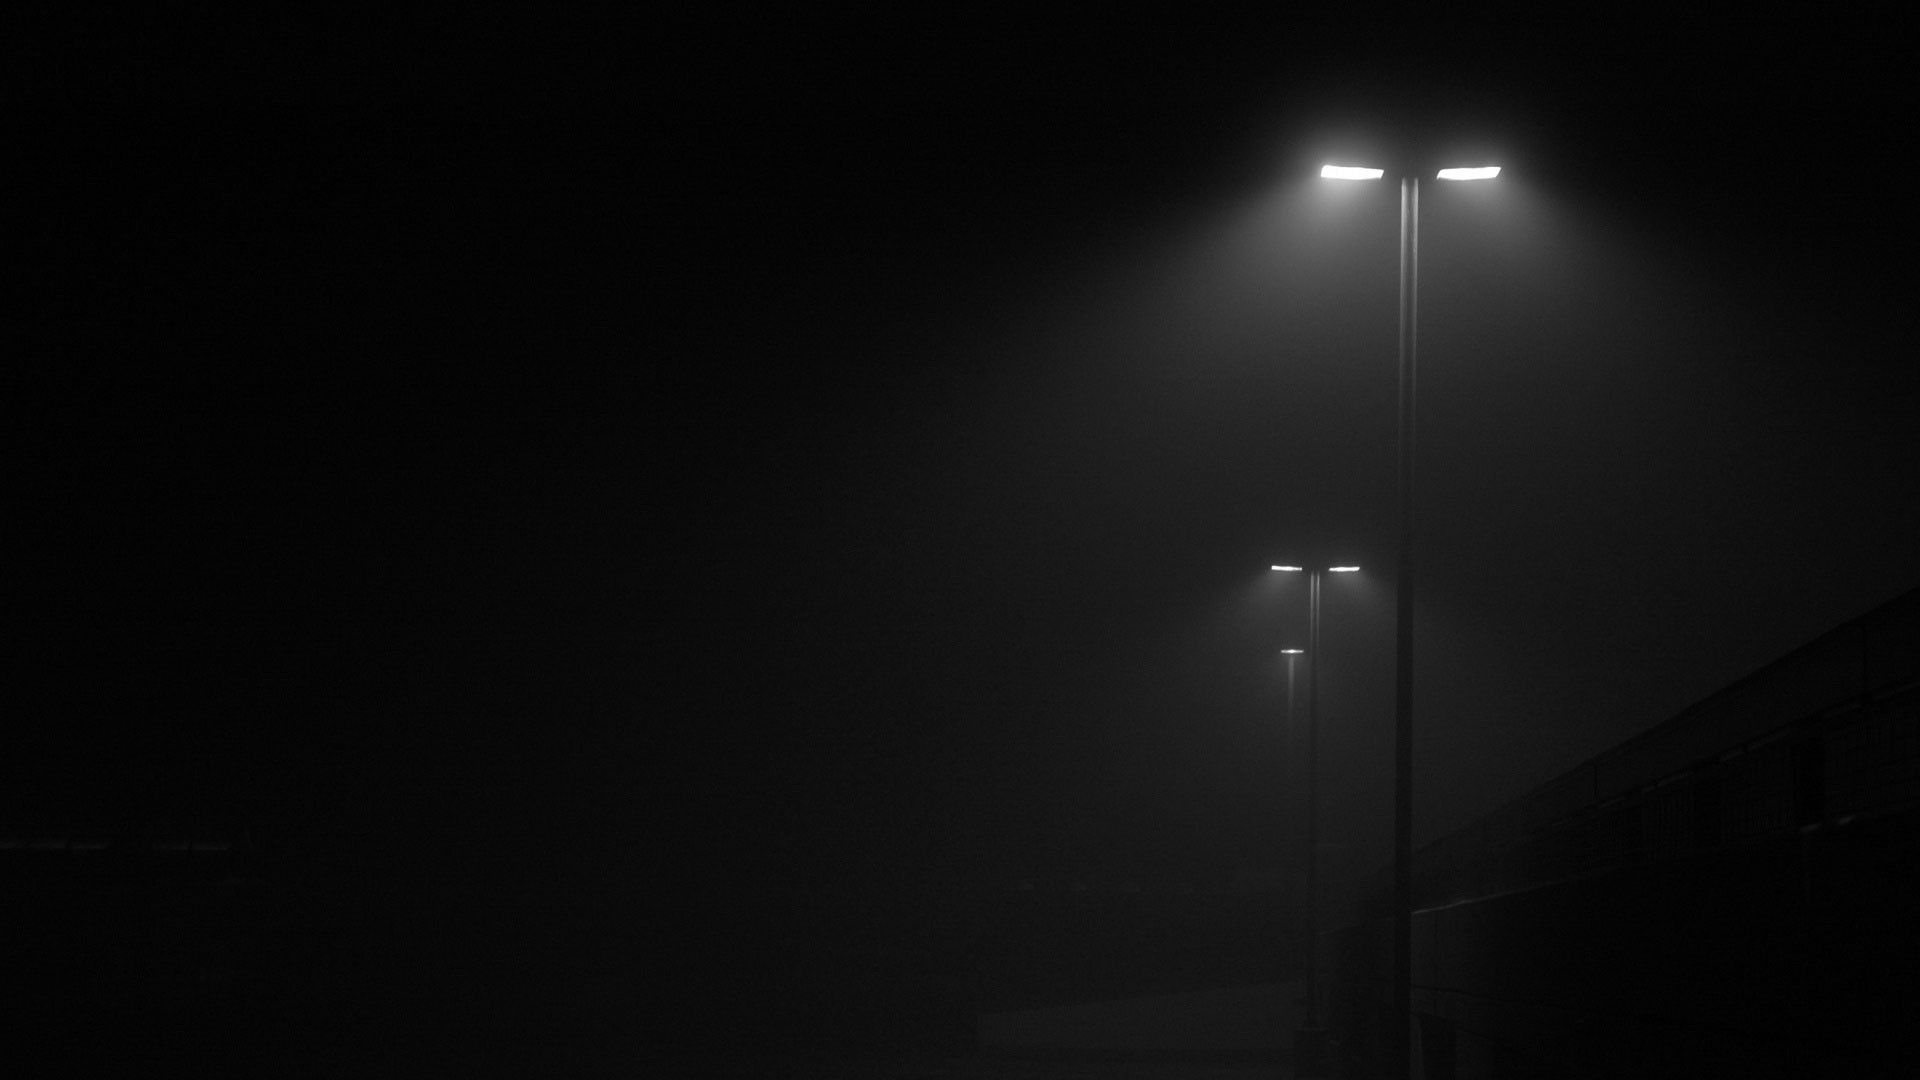 Street Light, HD Artist, 4k Wallpaper, Image, Background, Photo and Picture